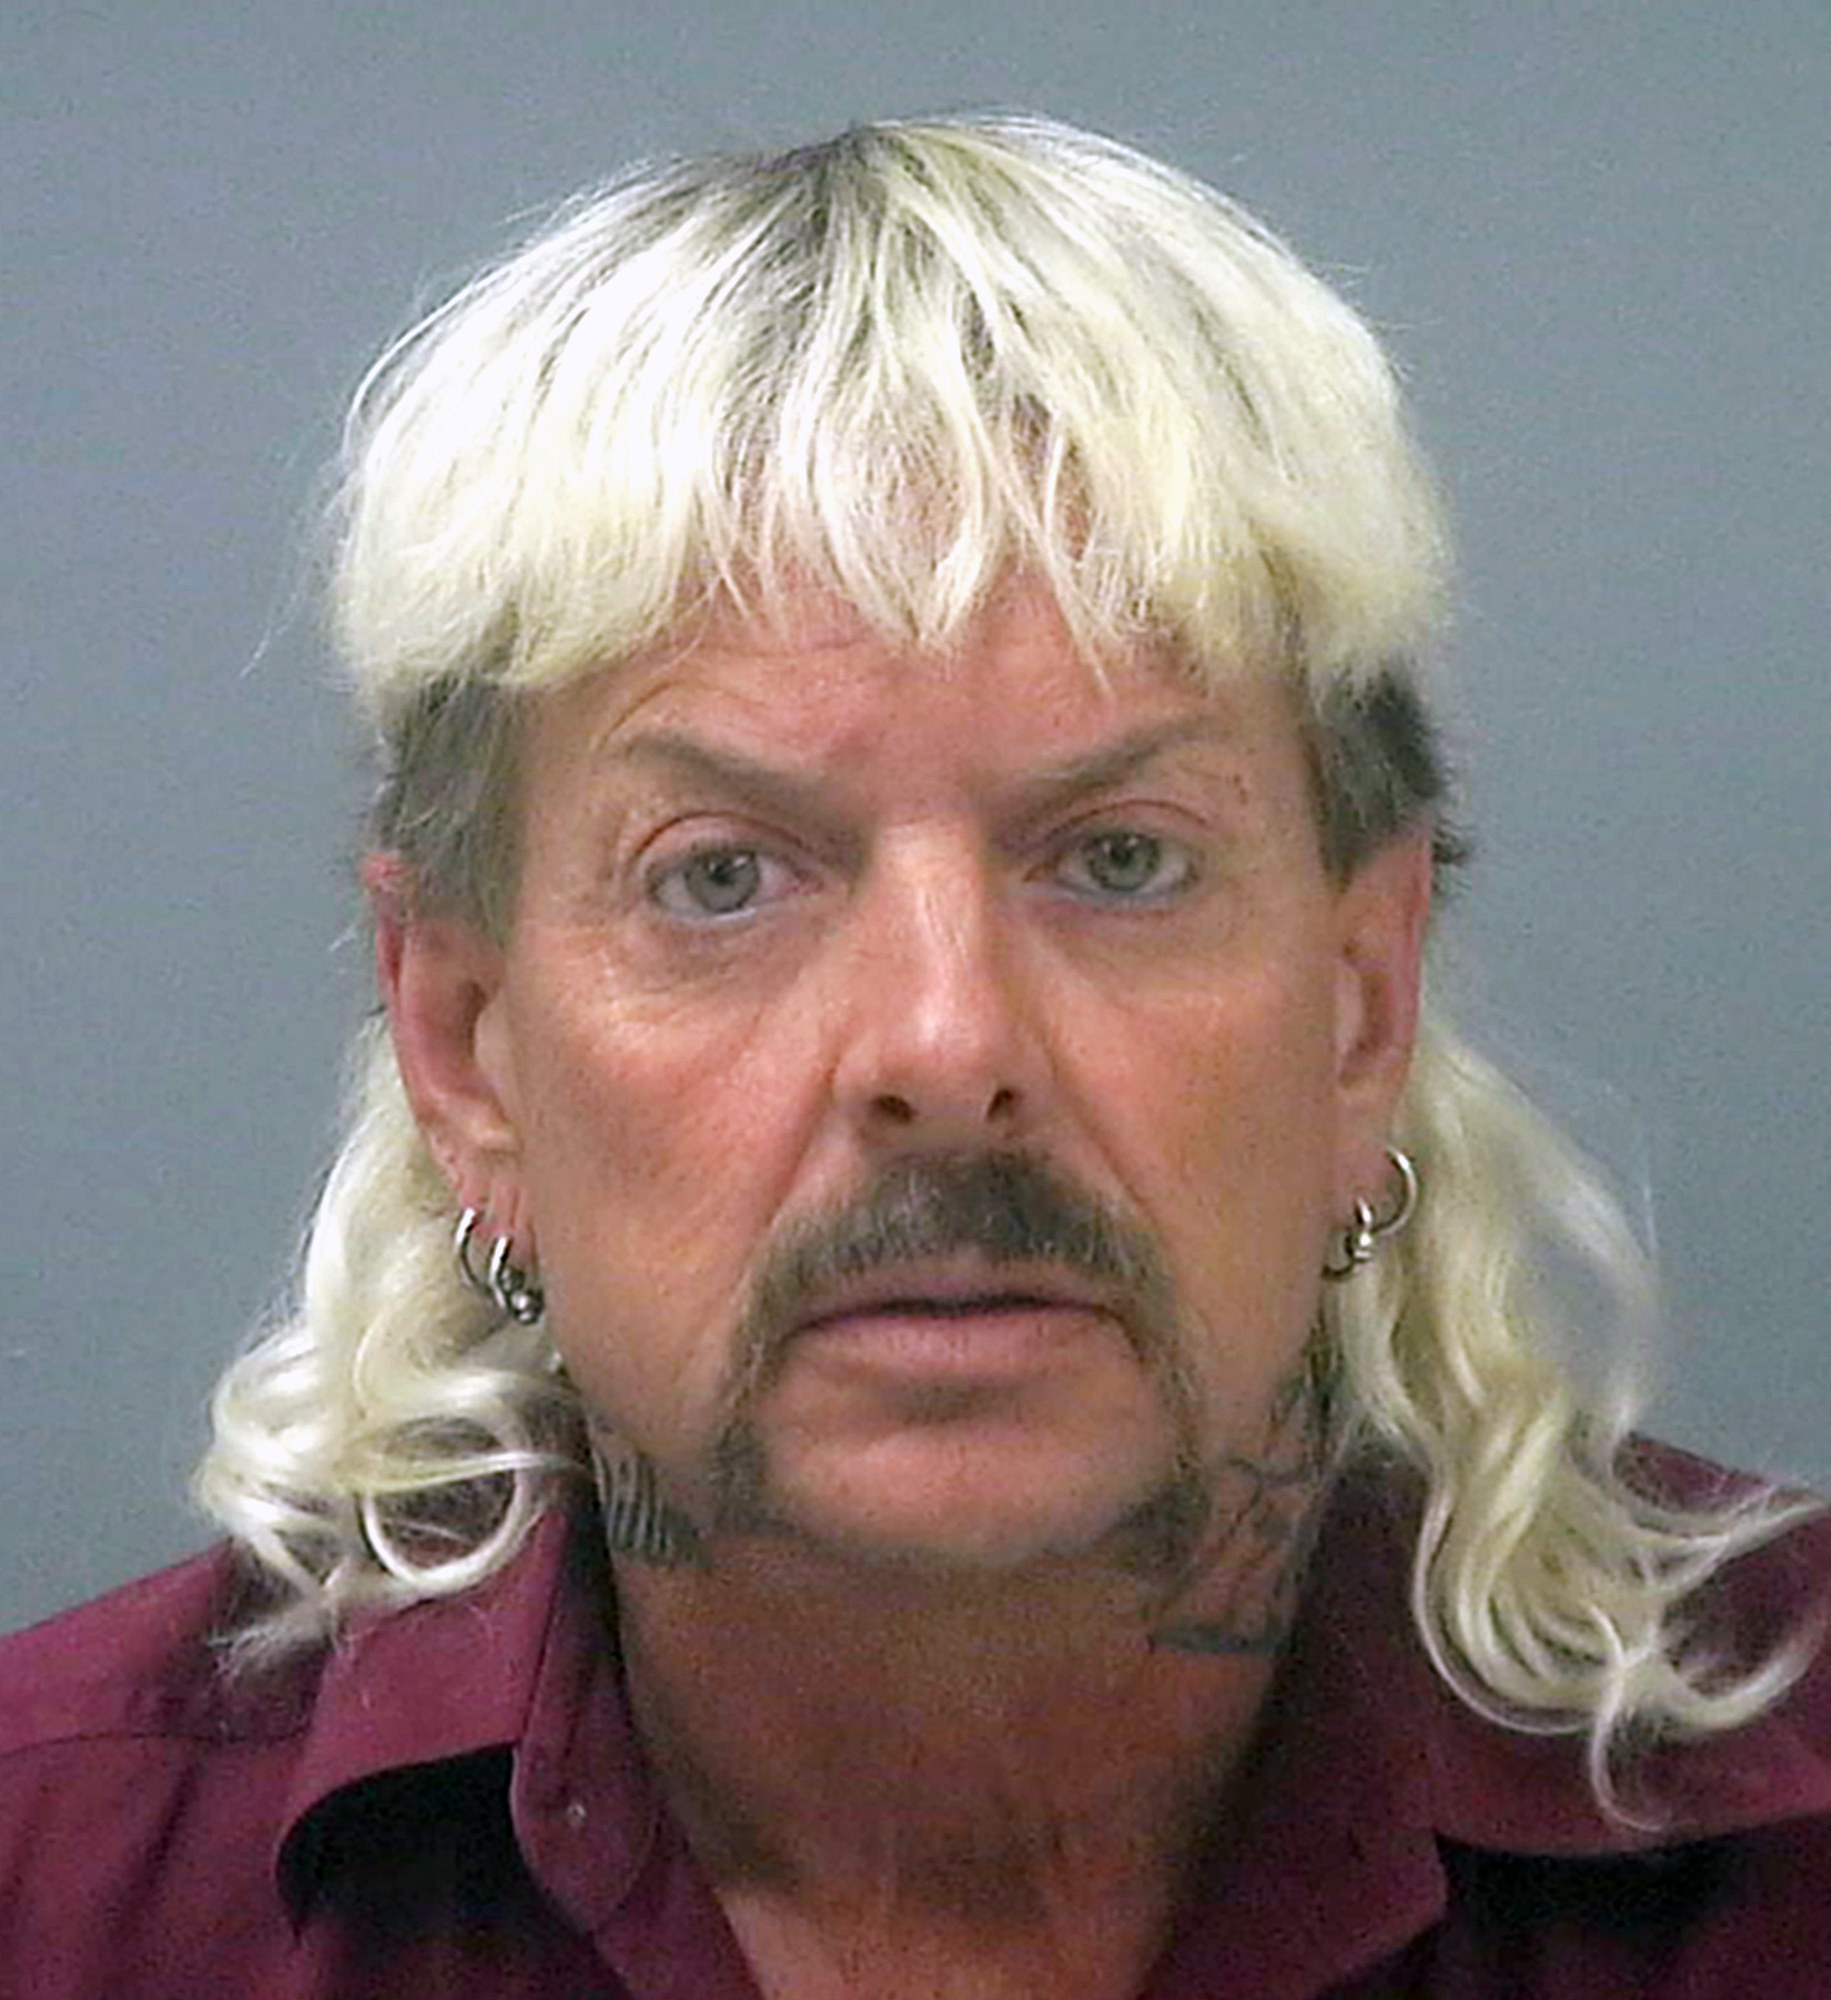 Joe Exotic mug shot where his hair is bleached blonde and in a mullet and multiple piercings